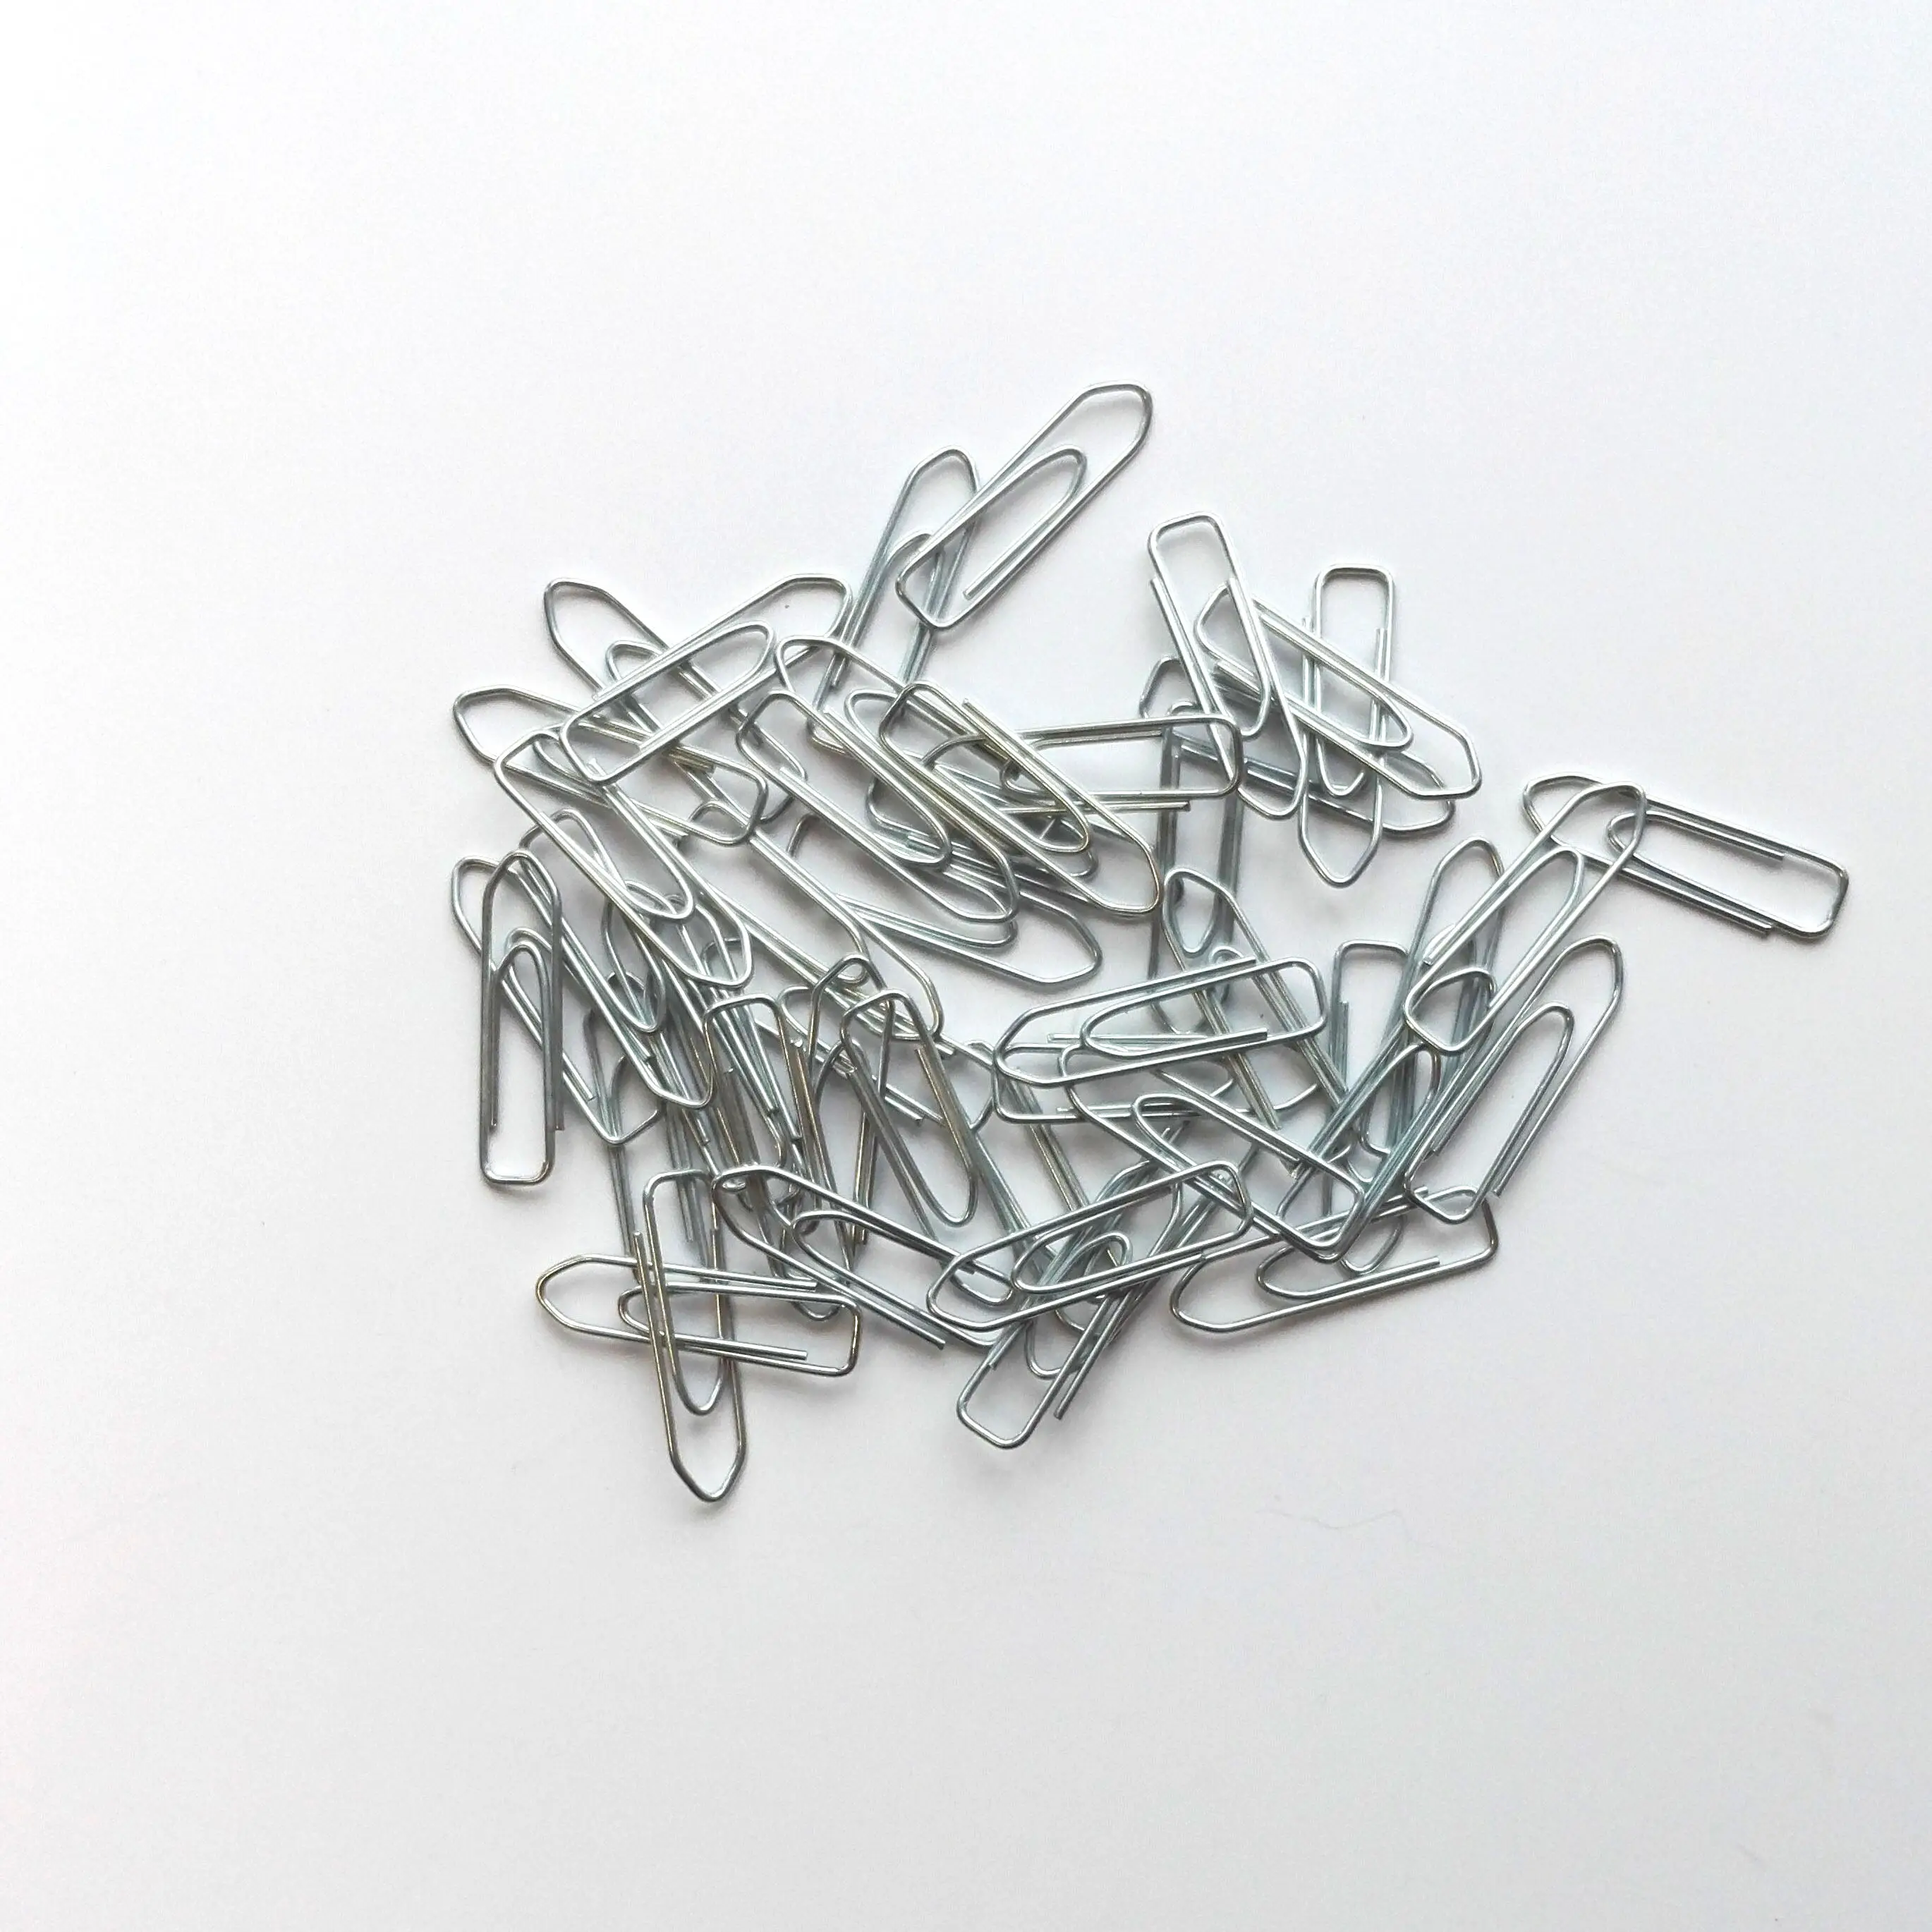 Manufacture price hot sale silver color zinc plating boat shape metal paper clips for school office supplies accessories